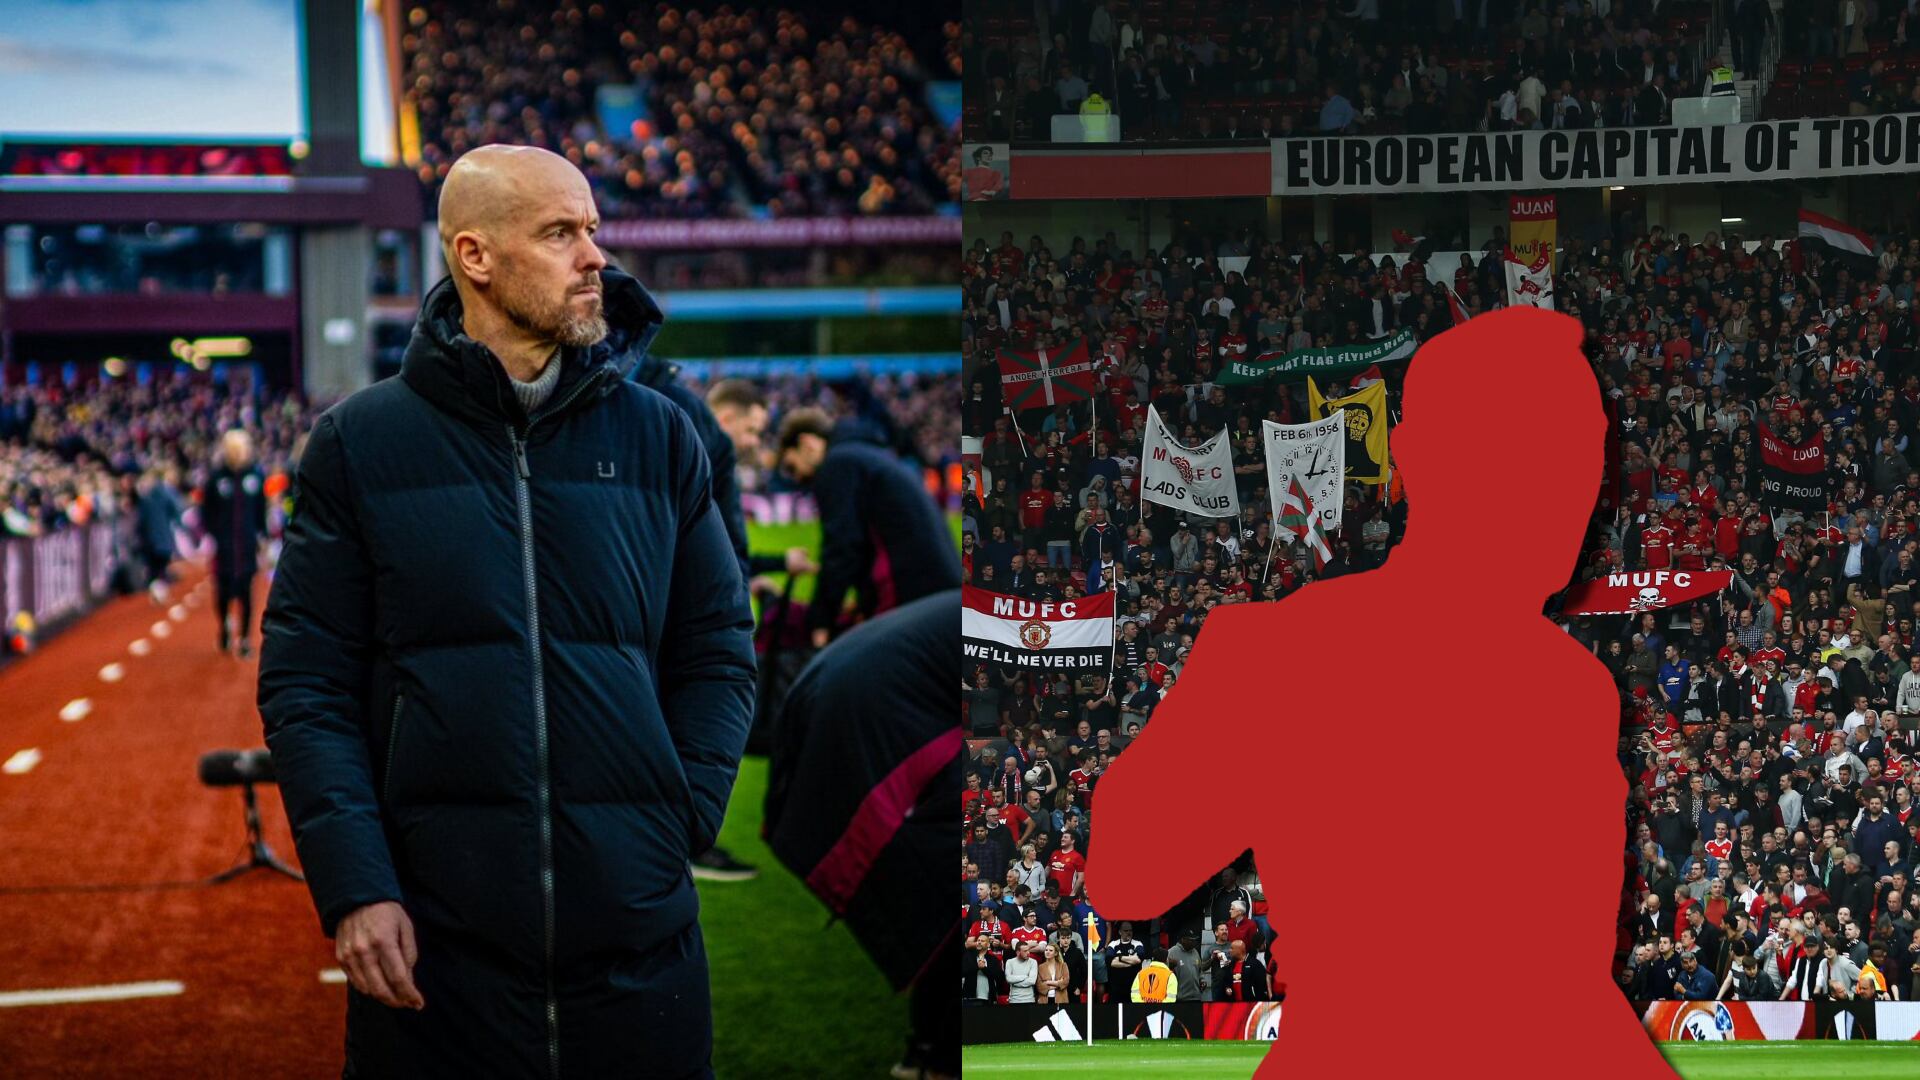 Bye Ten Hag? A Manchester United legend wants to become the coach of the team